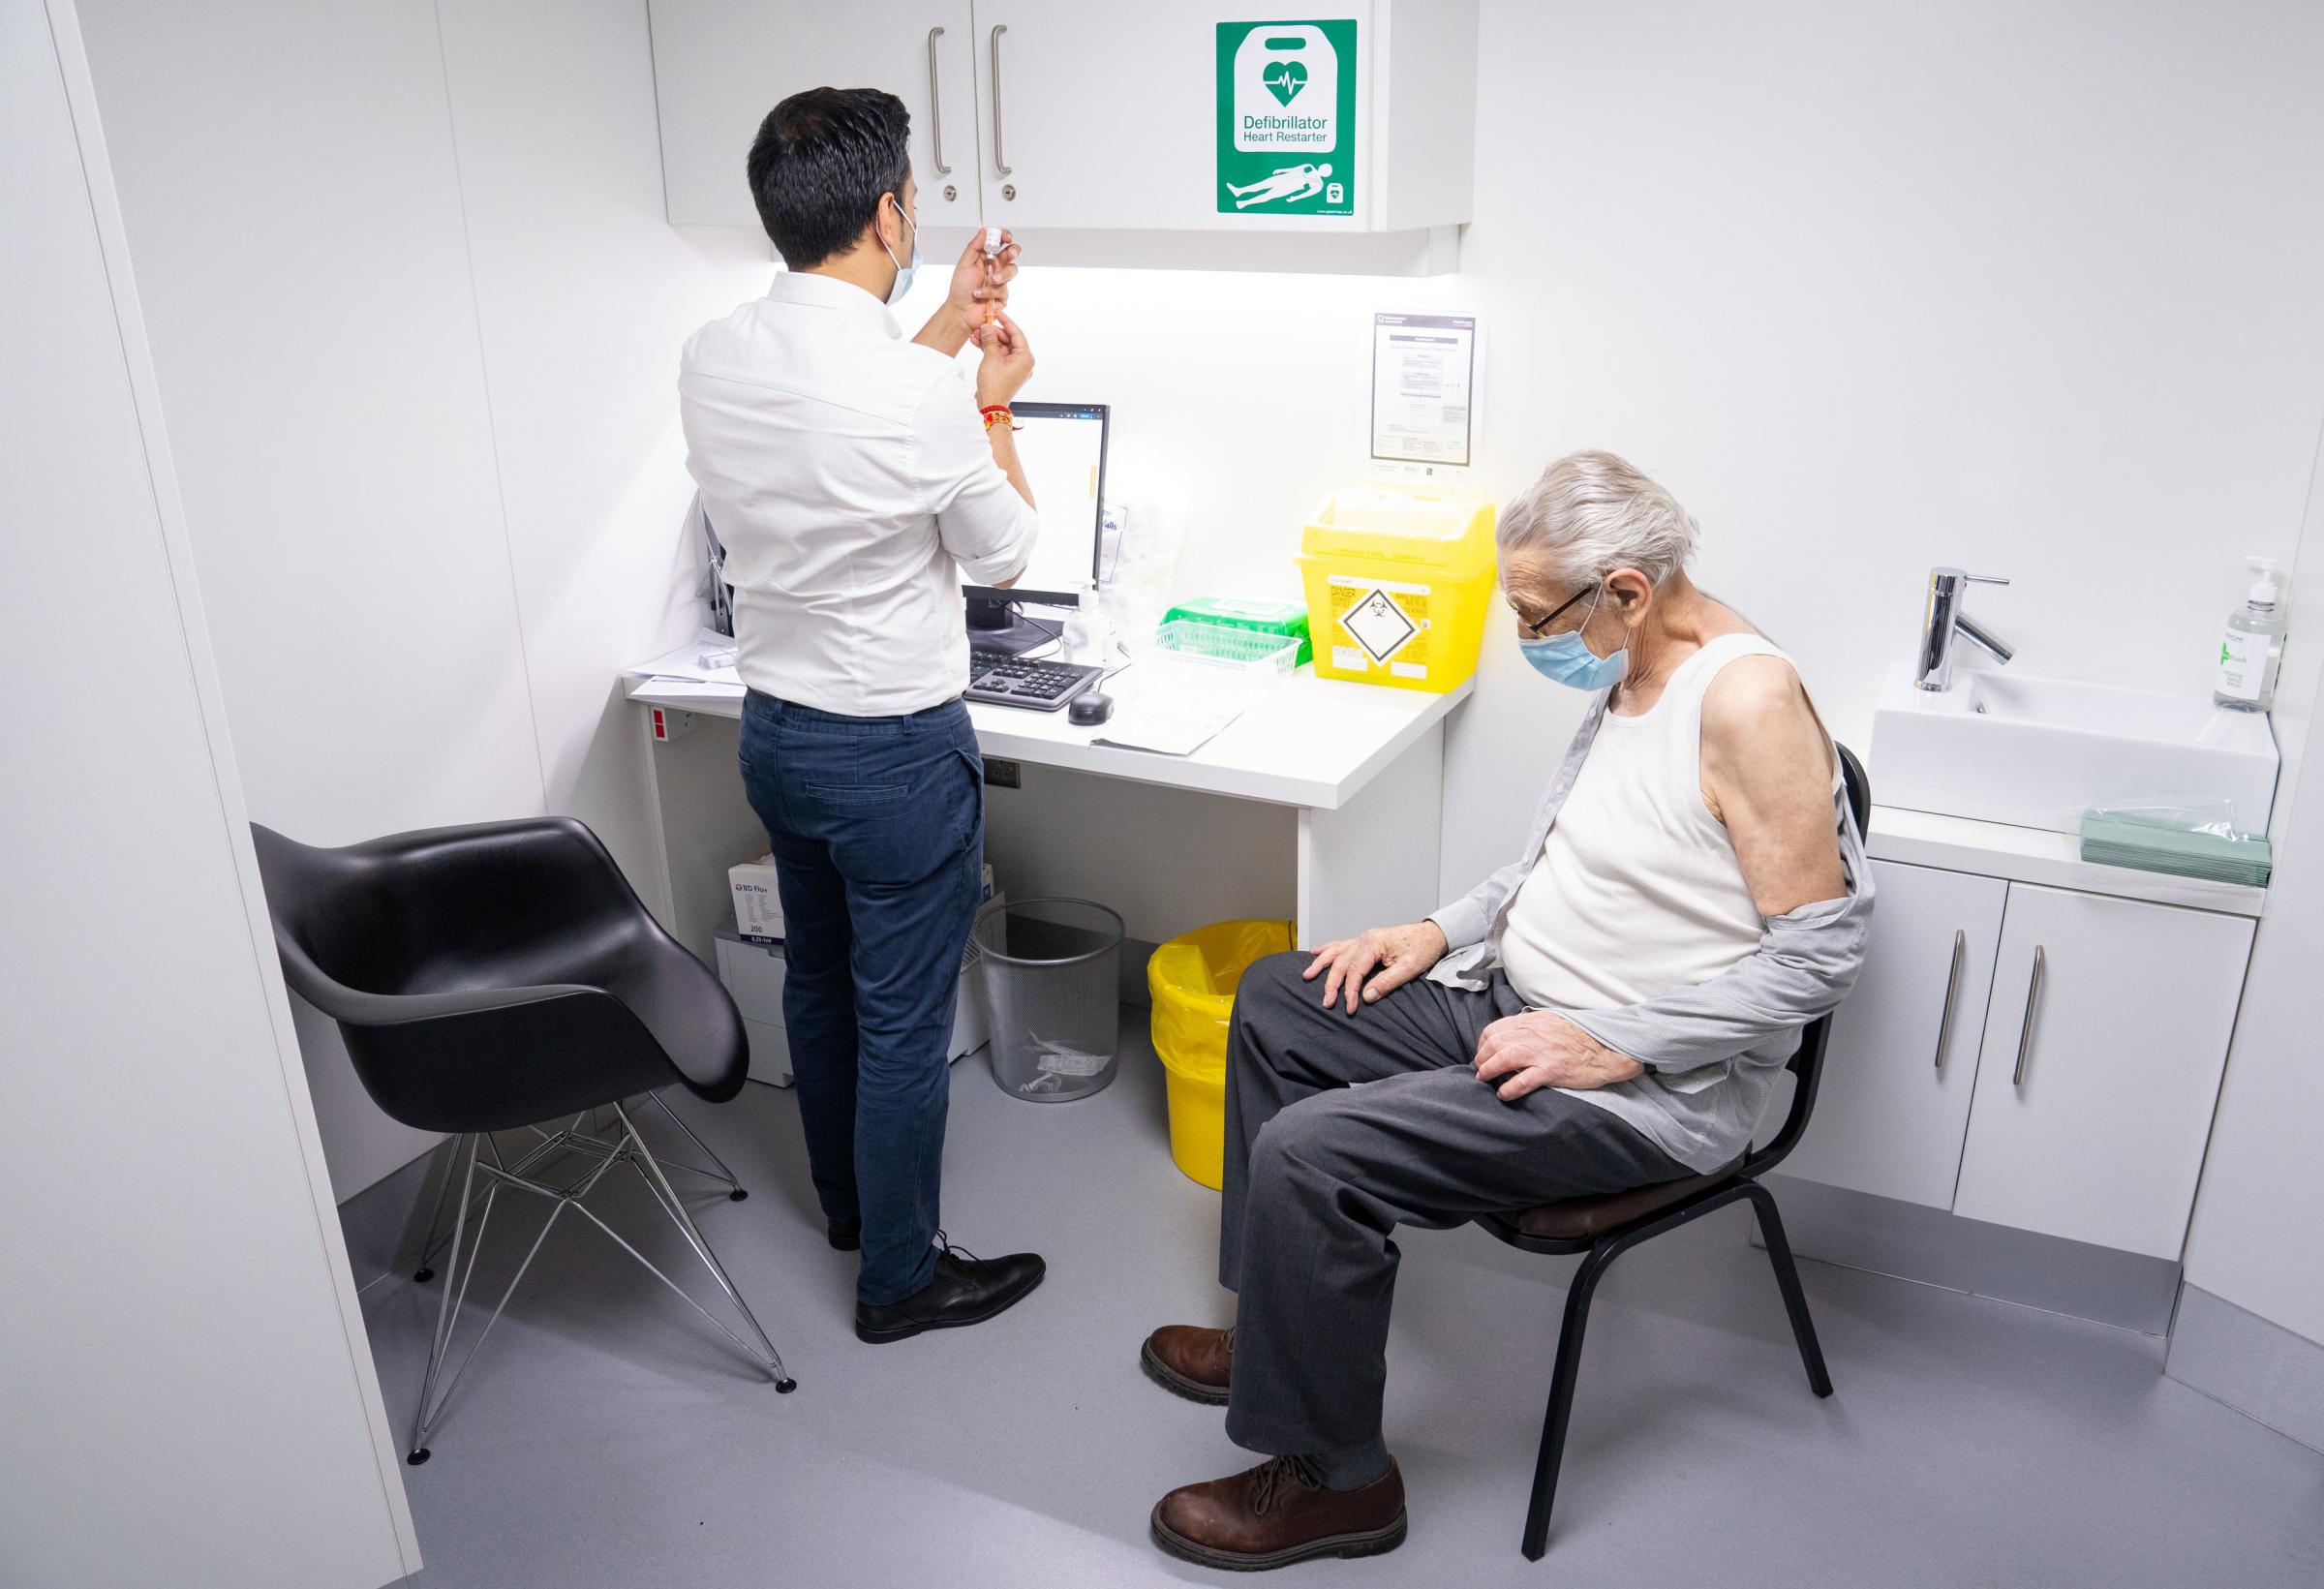 Pharmacist Bhaveen Patel prepares to give a dose of the Oxford / AstraZeneca covid vaccine to Brian Bourne at a coronavirus vaccination clinic held at Junction Pharmacy in Brixton, London. The roll out of the vaccination programme continues as the Governm